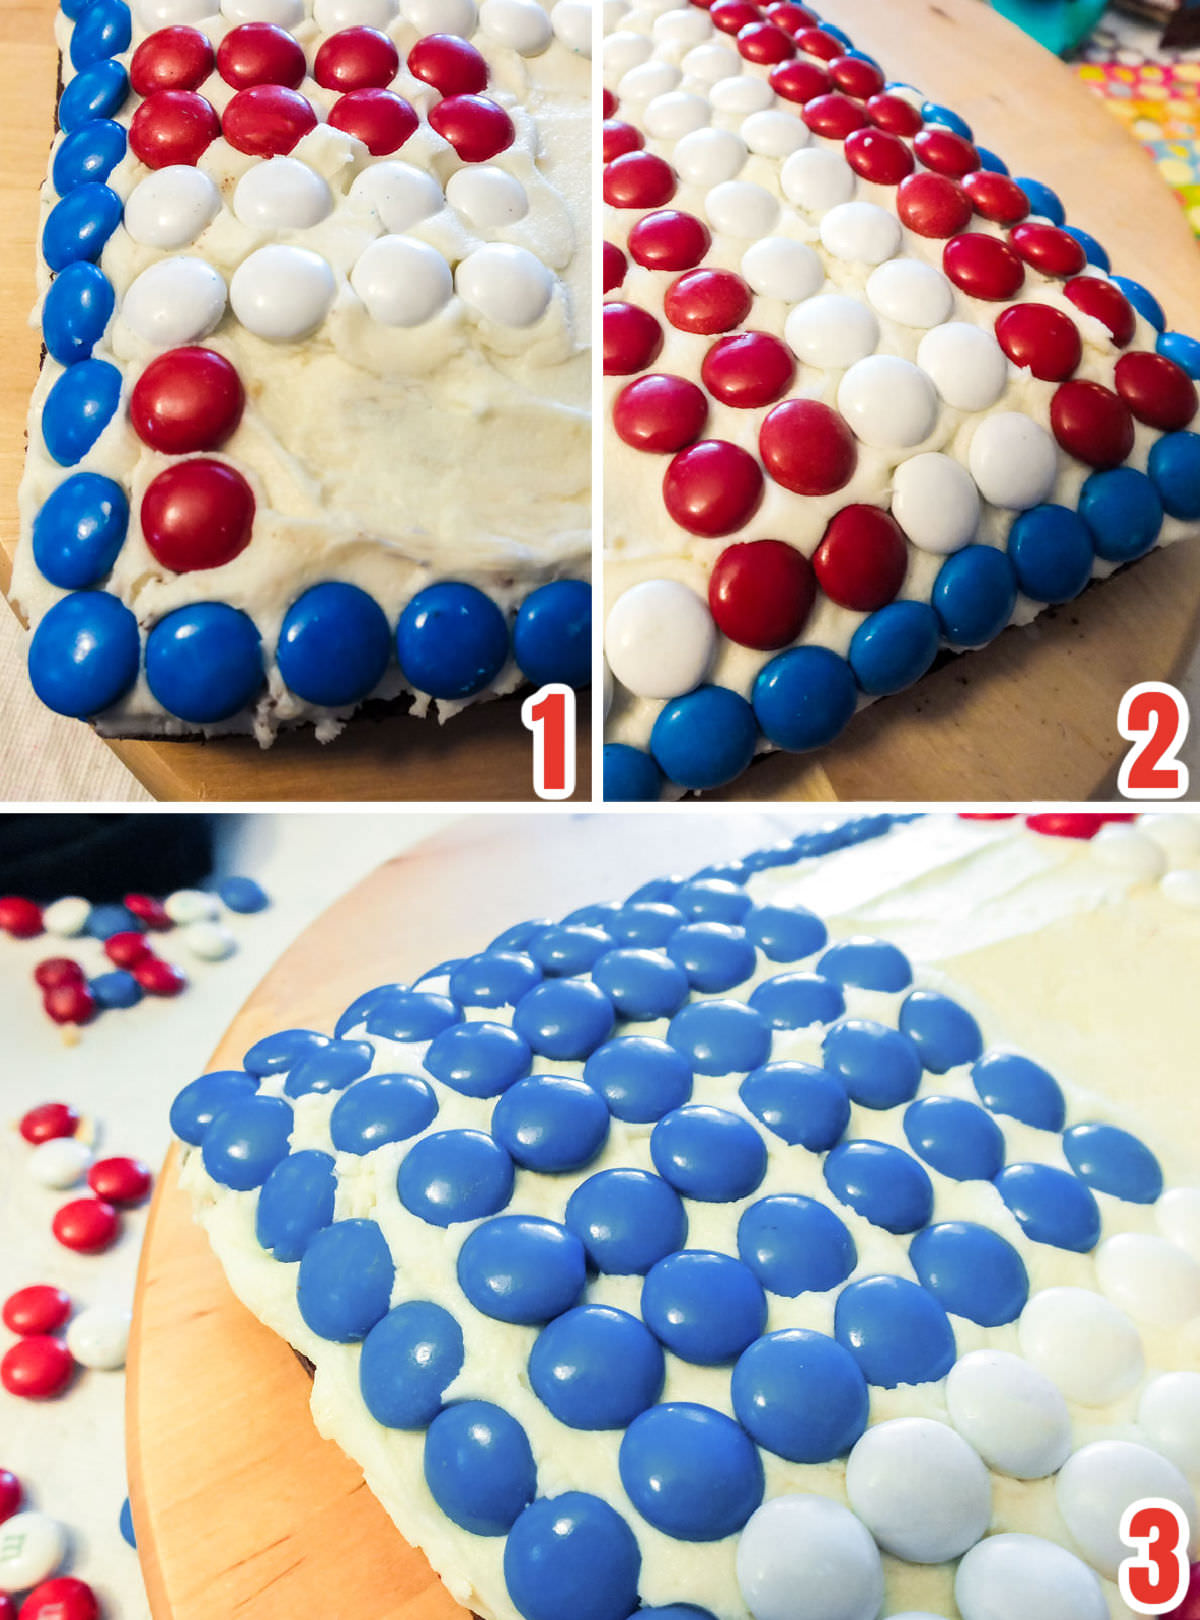 Collage image showing all the steps necessary to create an American Flag Cake using Red White and Blue M&M's.